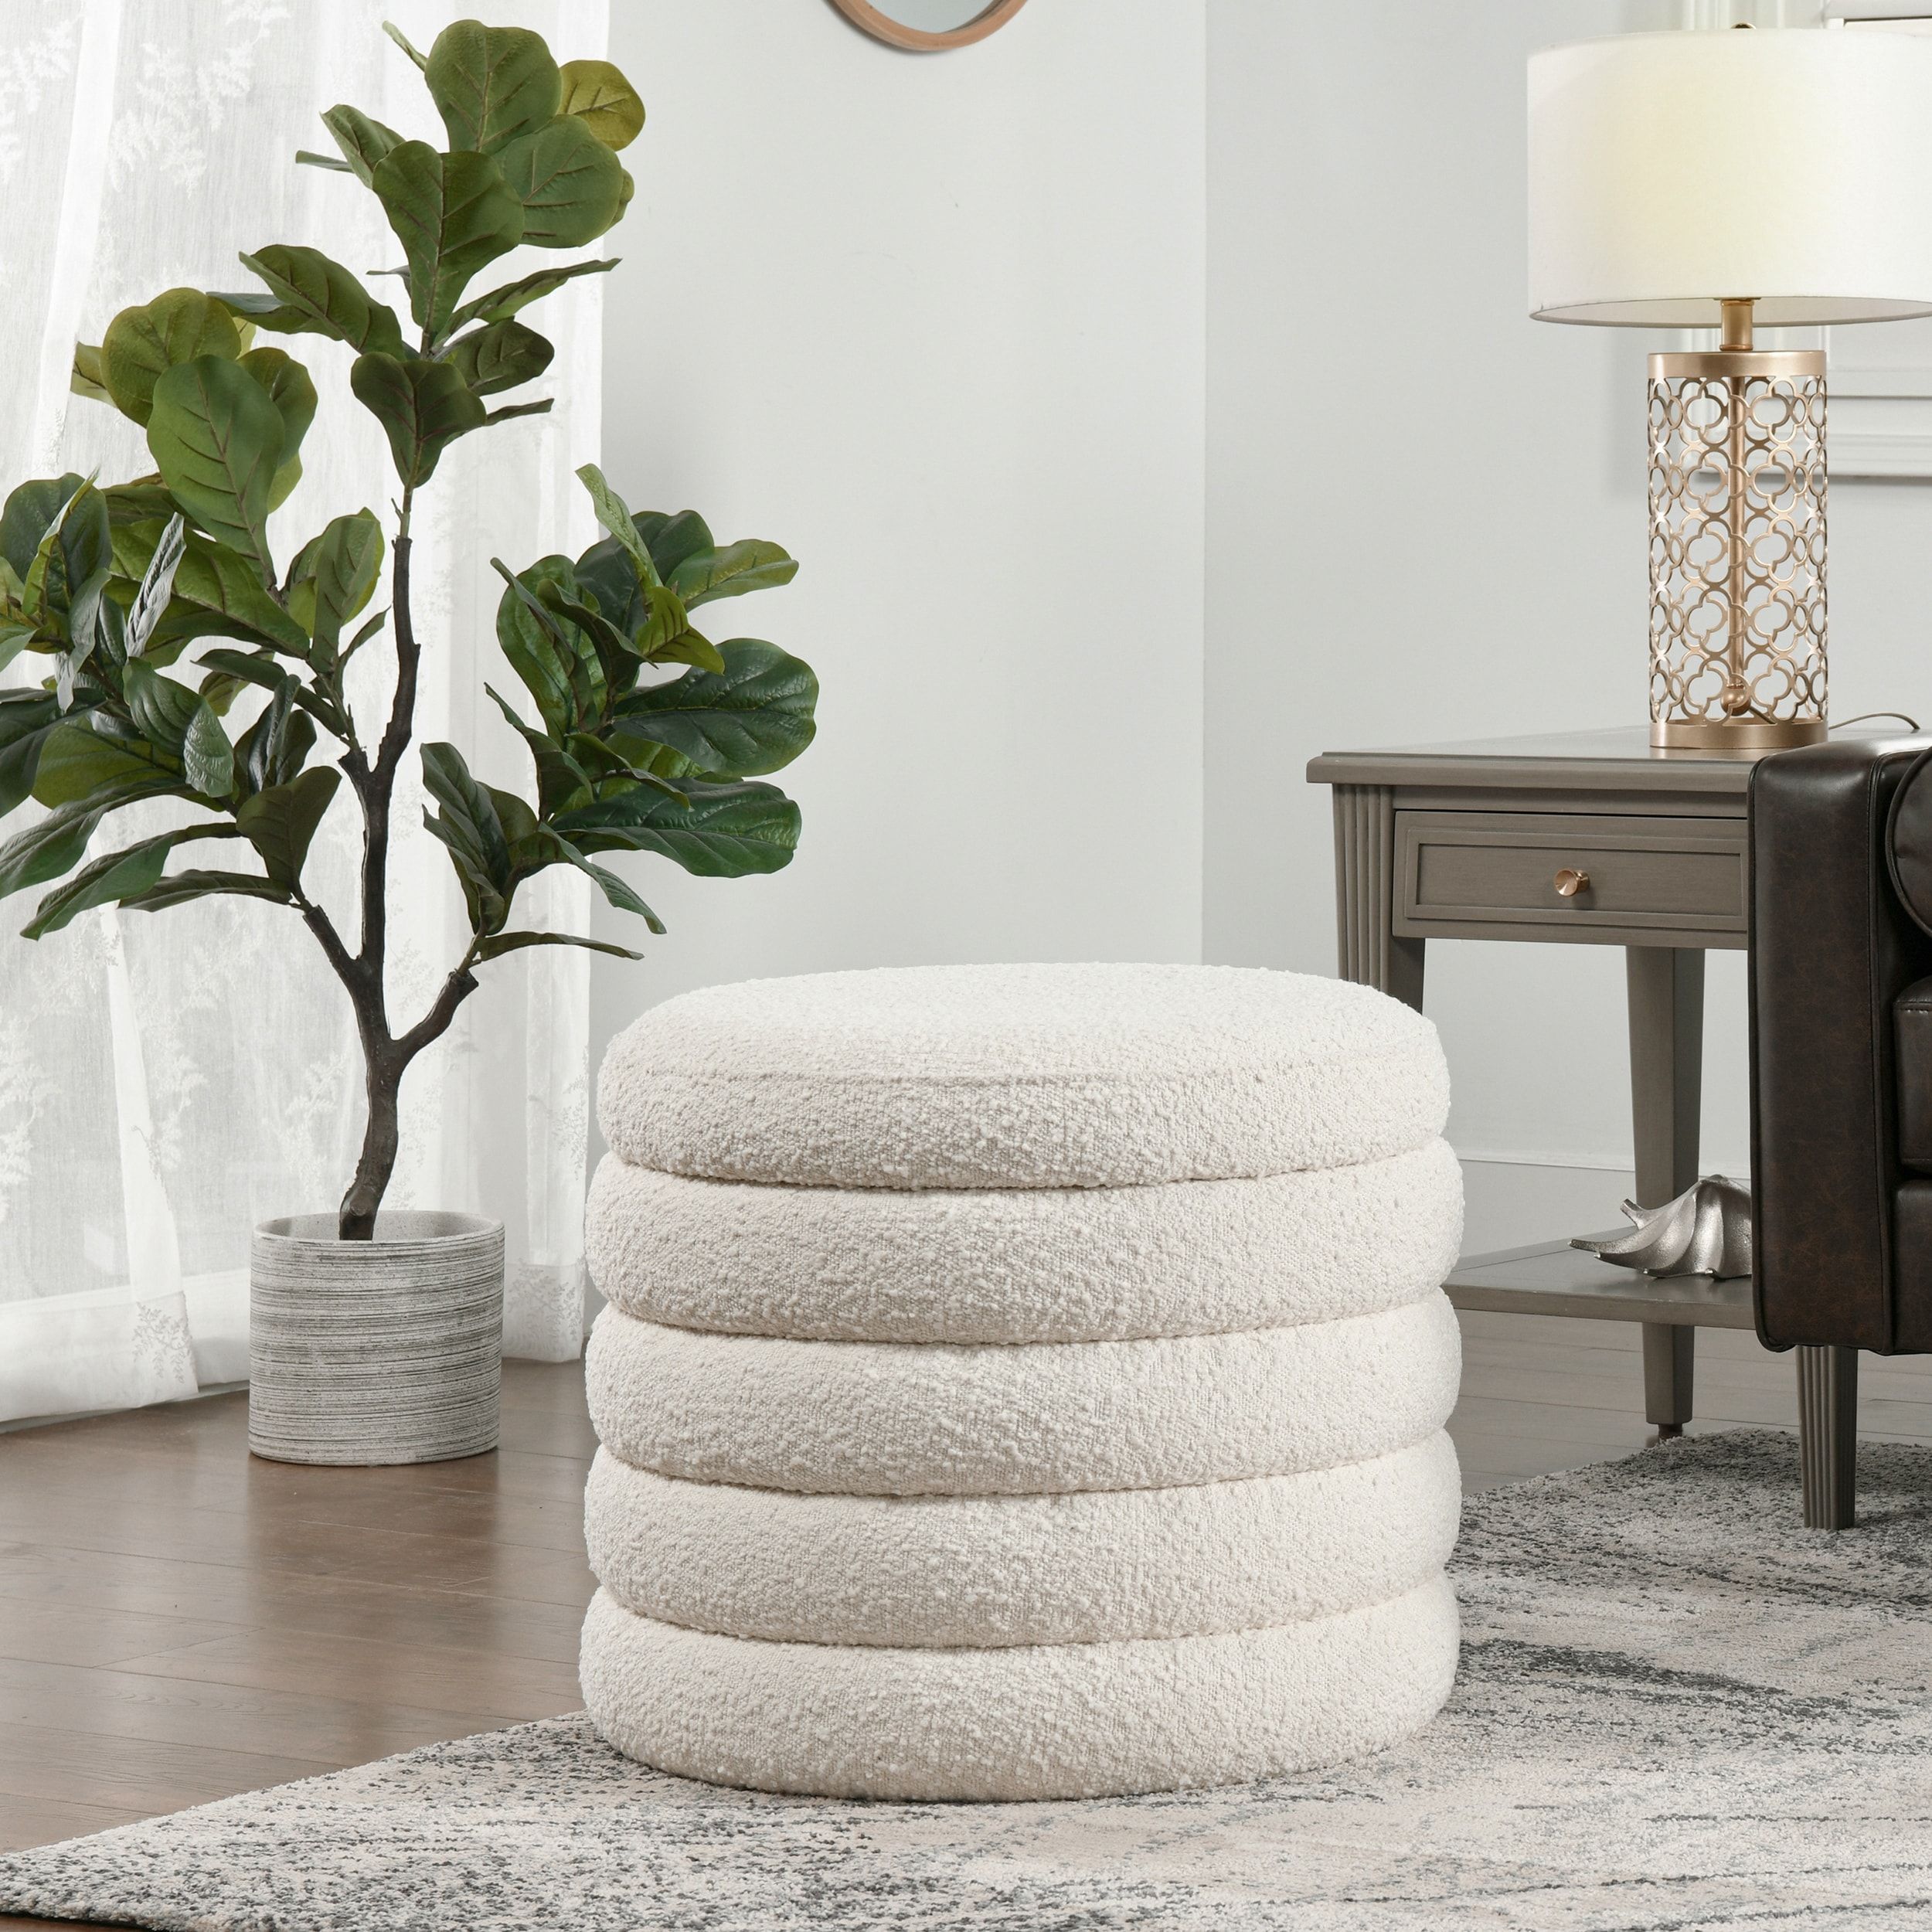 Fuji 19" Upholstered Round Storage Ottoman, Ivory White Boucle – On Sale –  Overstock – 33780918 Regarding Boucle Ottomans (View 7 of 15)